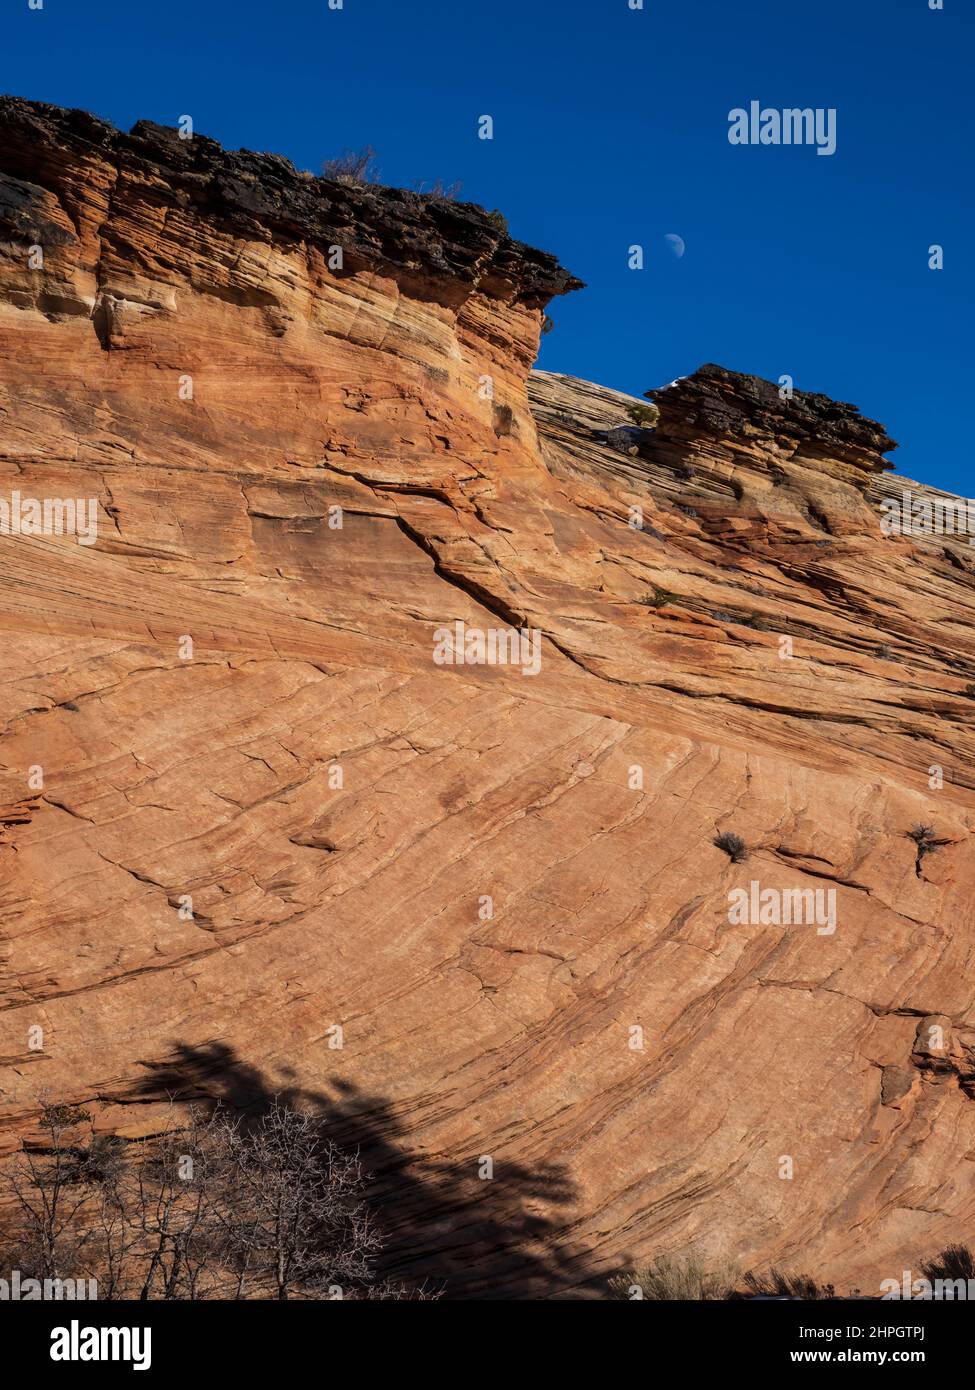 Cliffs and moon, Zion-Mount Carmel Highway, winter, Zion National Park, Utah. Stock Photo